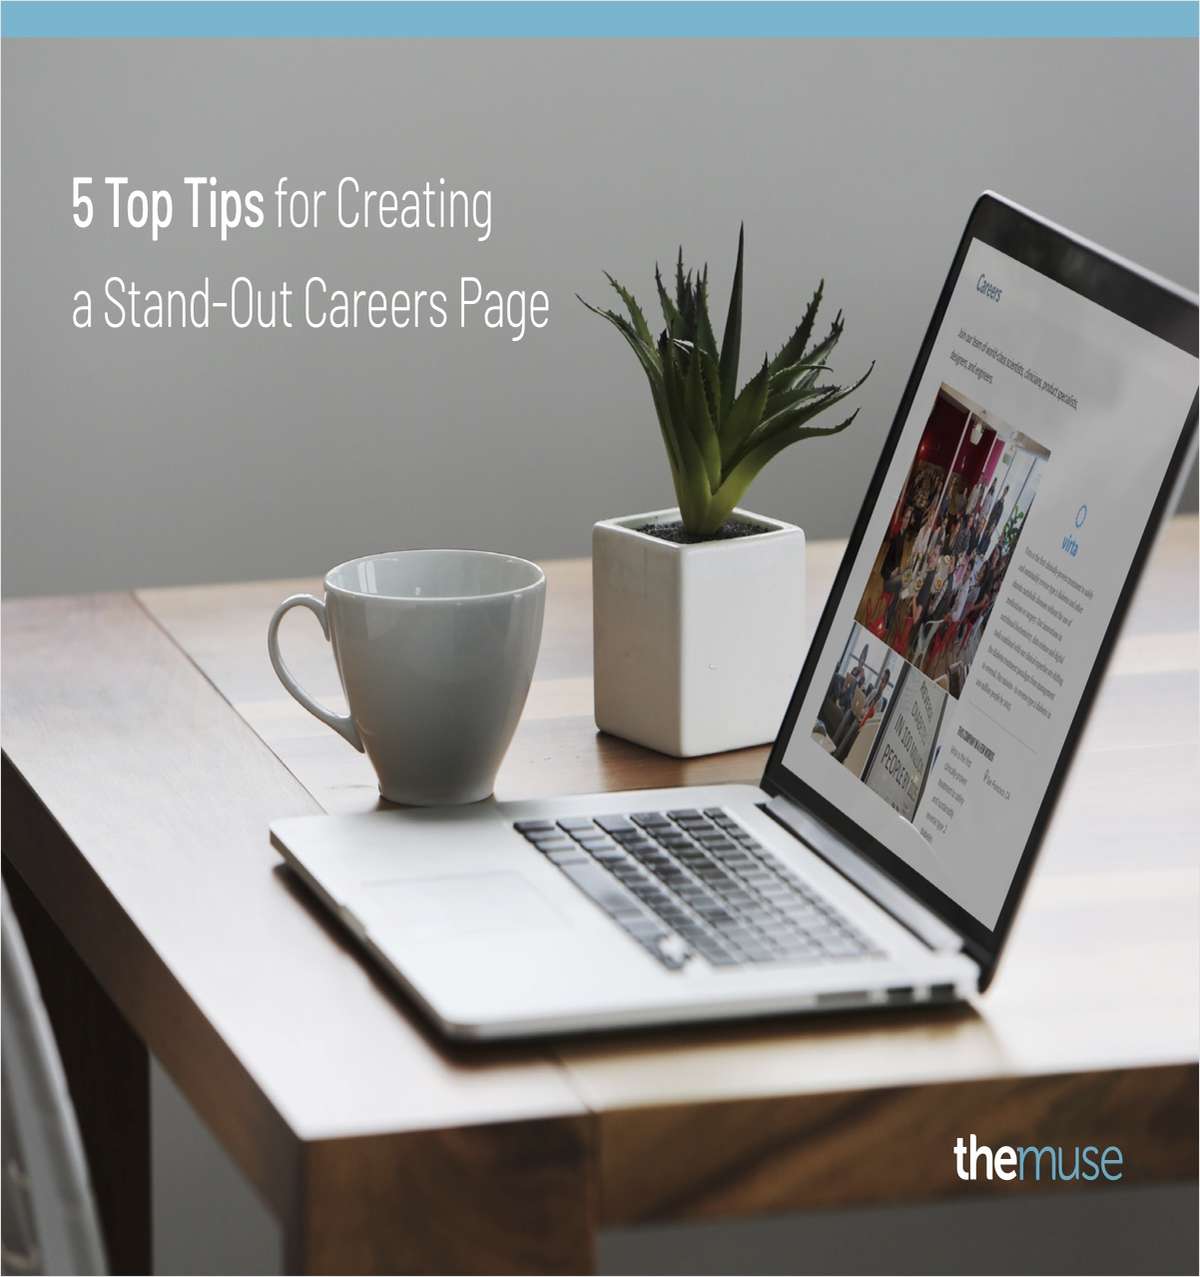 5 Top Tips for Creating a Stand-Out Candidate Experience